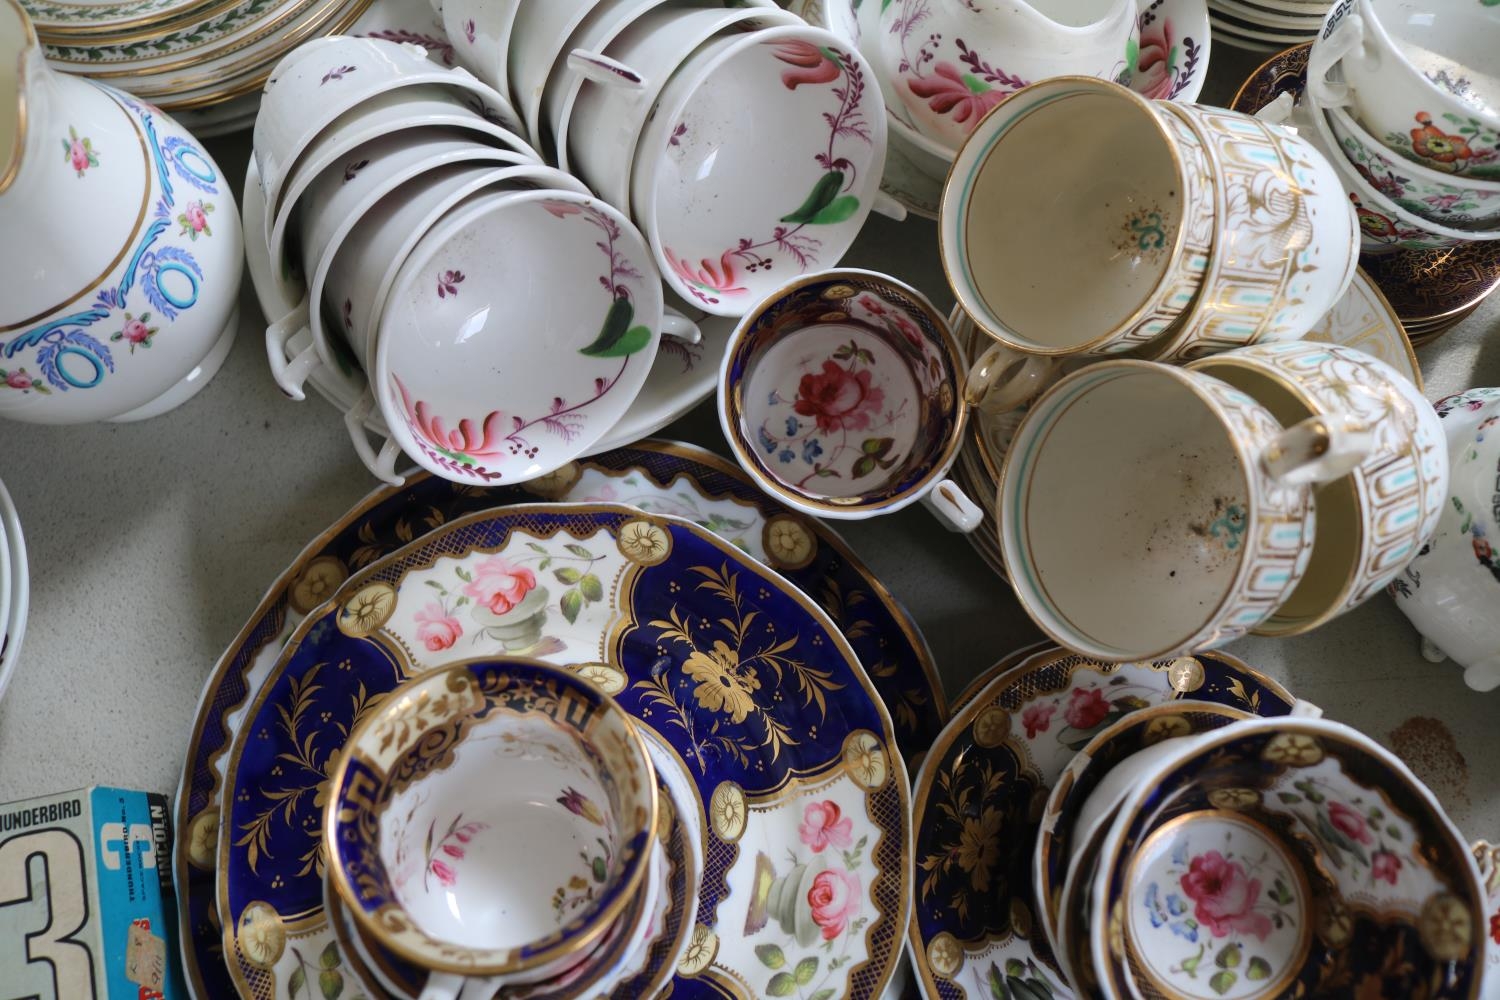 Extensive collection of English Tea cups and saucers Teapots, Spode, H & R Daniel, New hall etc - Image 5 of 9